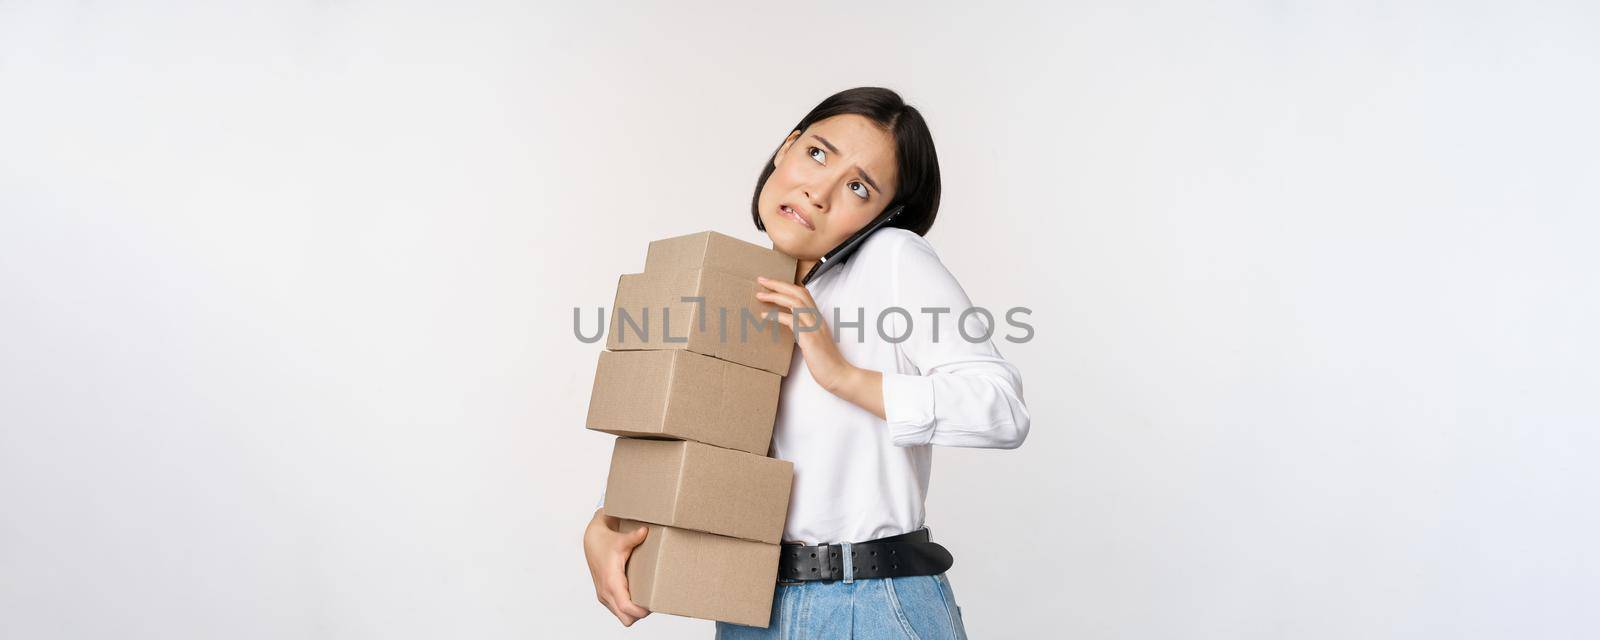 Young asian businesswoman answer phone call, talking on mobile while carrying pile of boxes with orders, standing over white background.